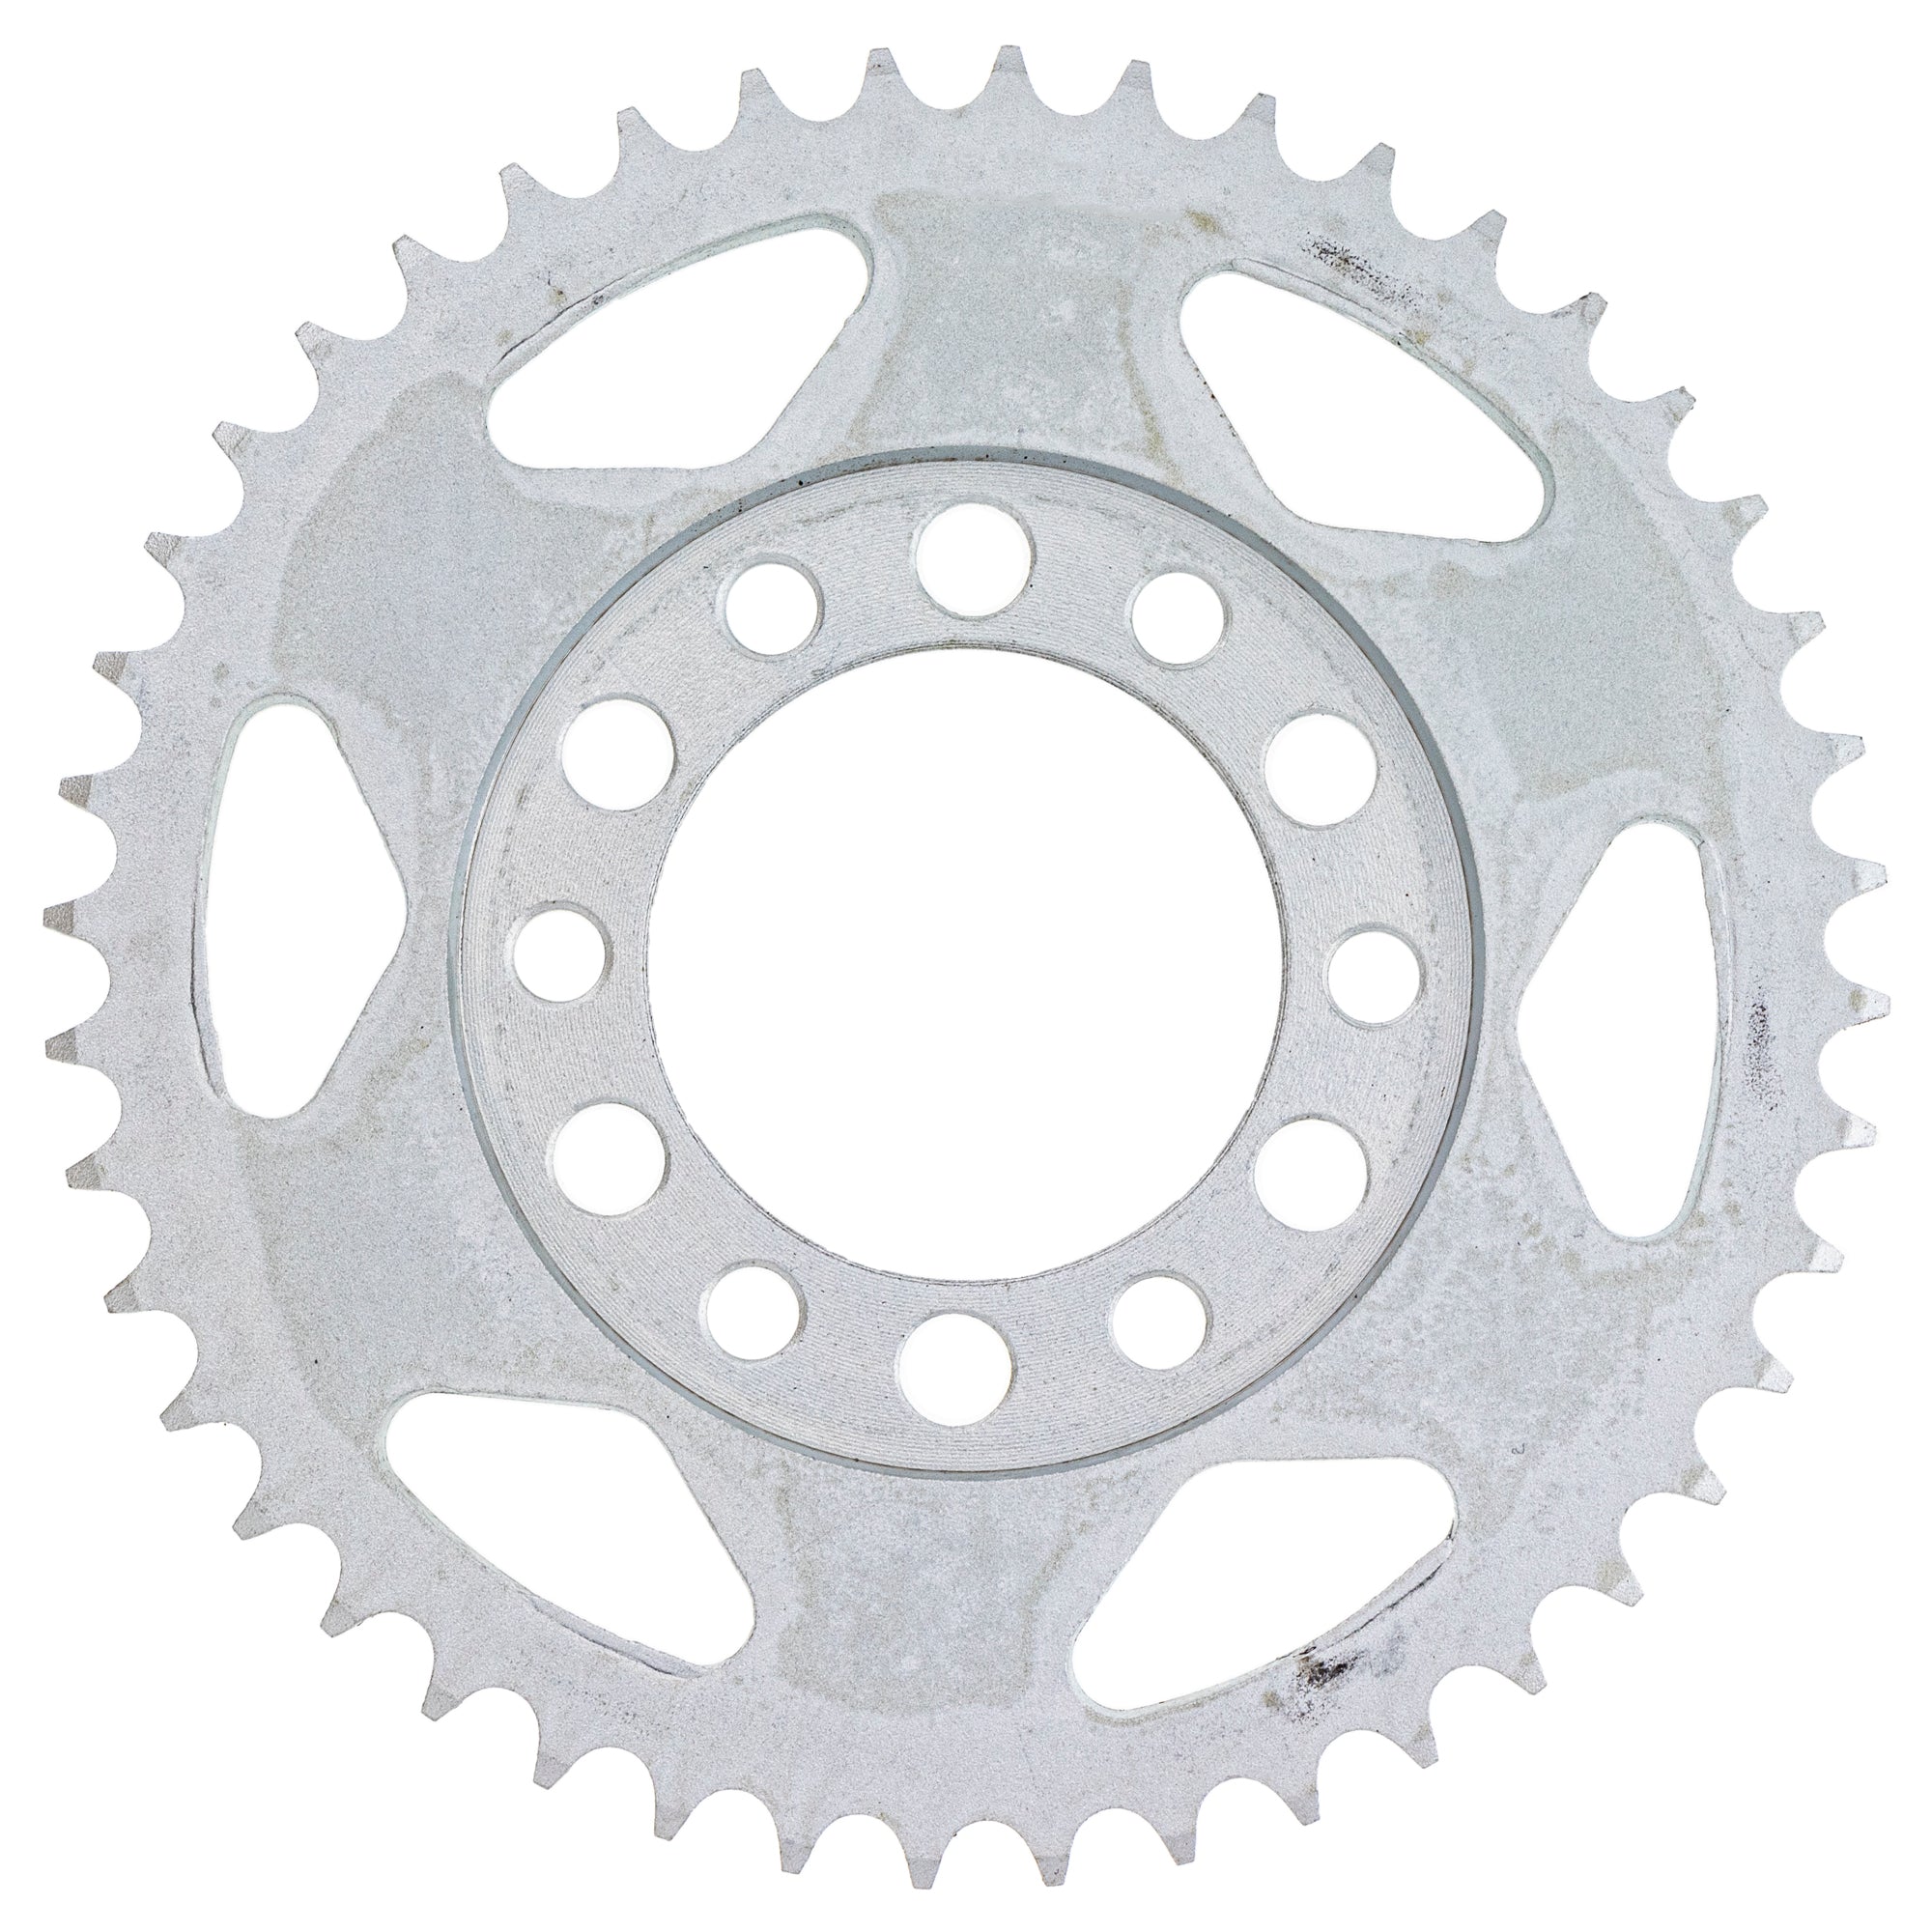 428 Pitch Rear 44T Front 13T Drive Sprocket Kit for Yamaha YZ80